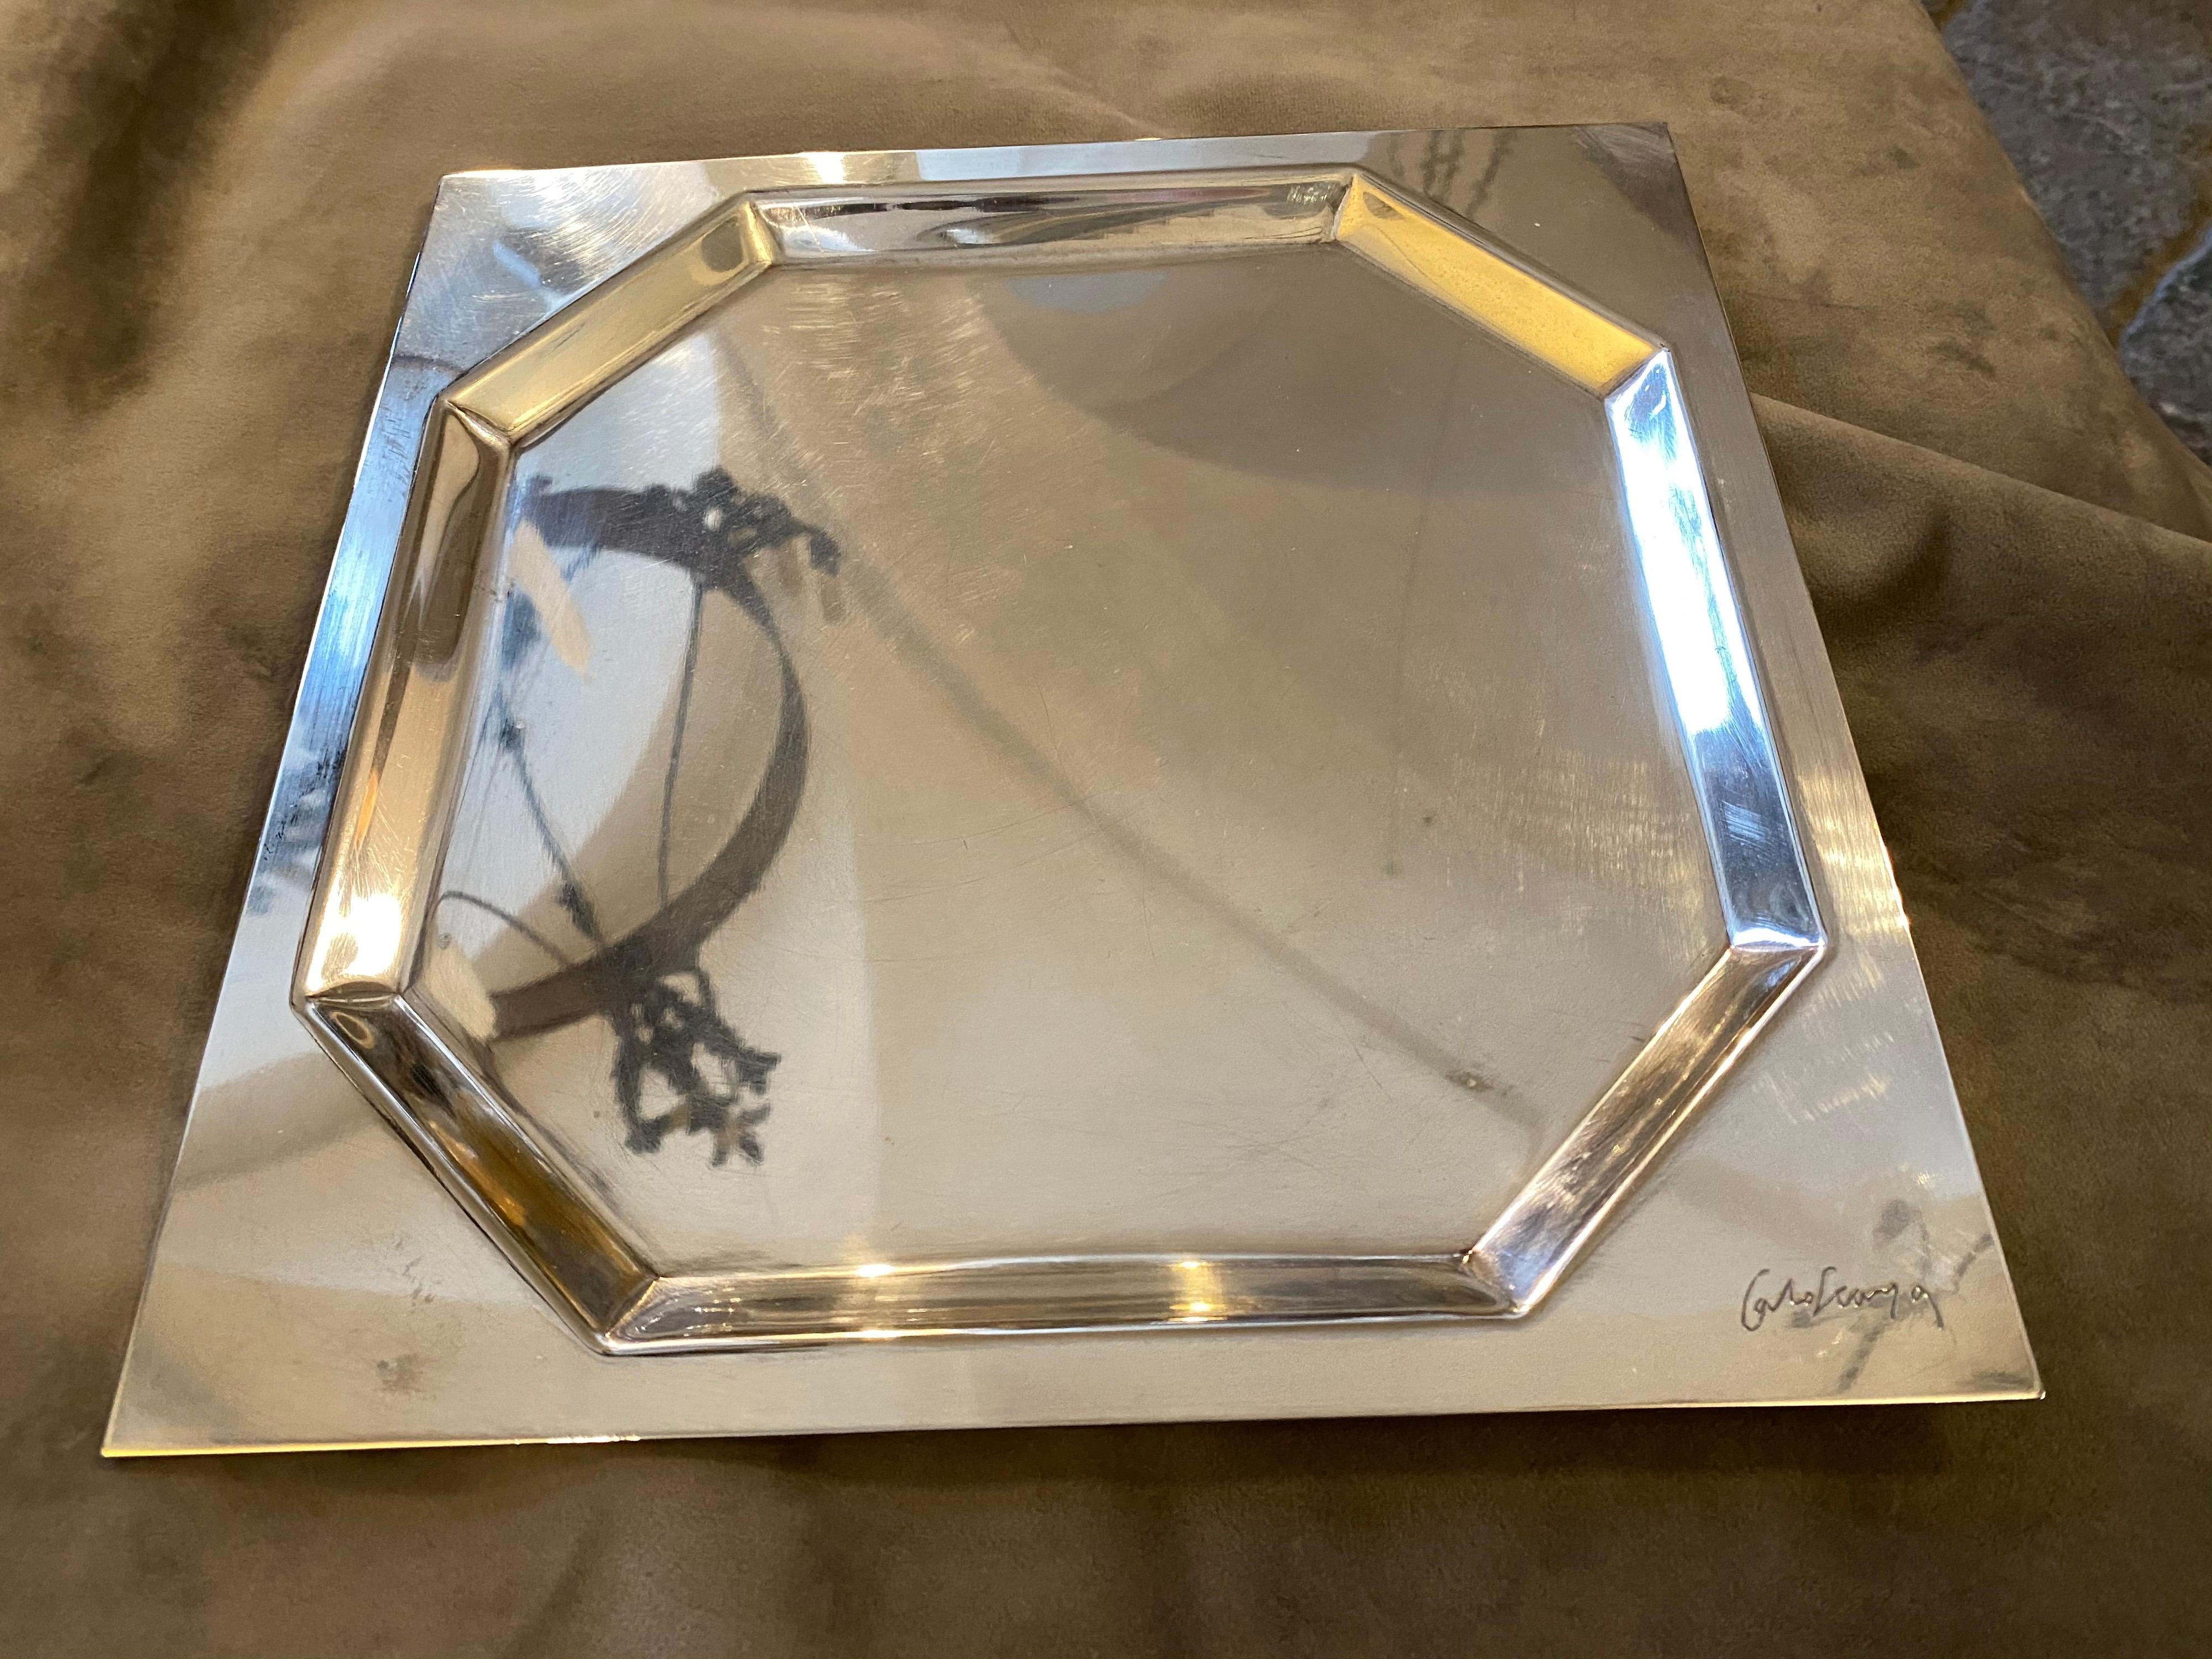 It's a silver plated squared tray designed by Carlo Scarpa for Cleto Munari, it's signed Carlo Scarpa on the front as visible in a photo, and on the bottom Cleto Munari.